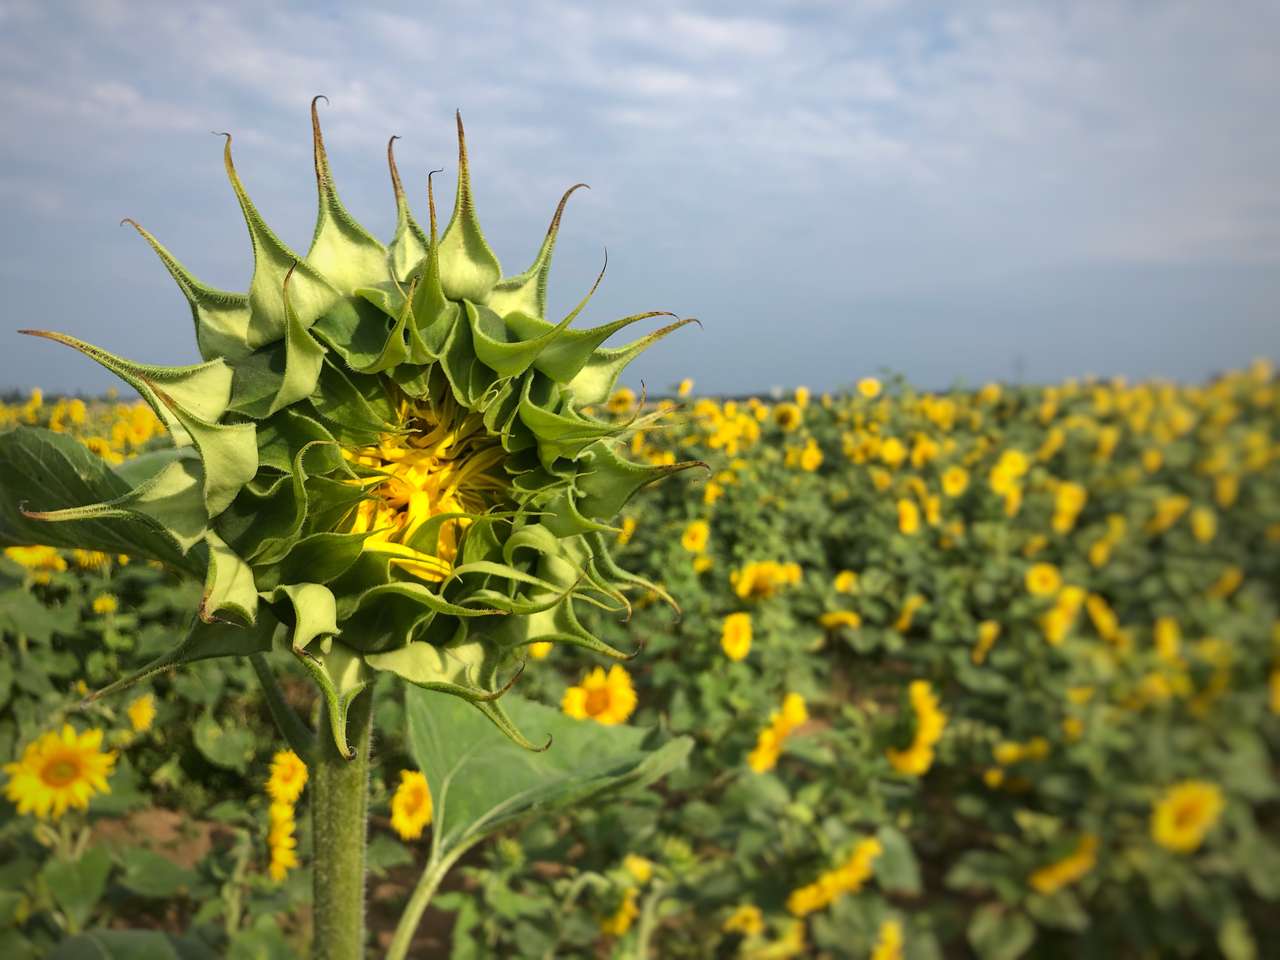 Sunflowers in Latvia puzzle online from photo